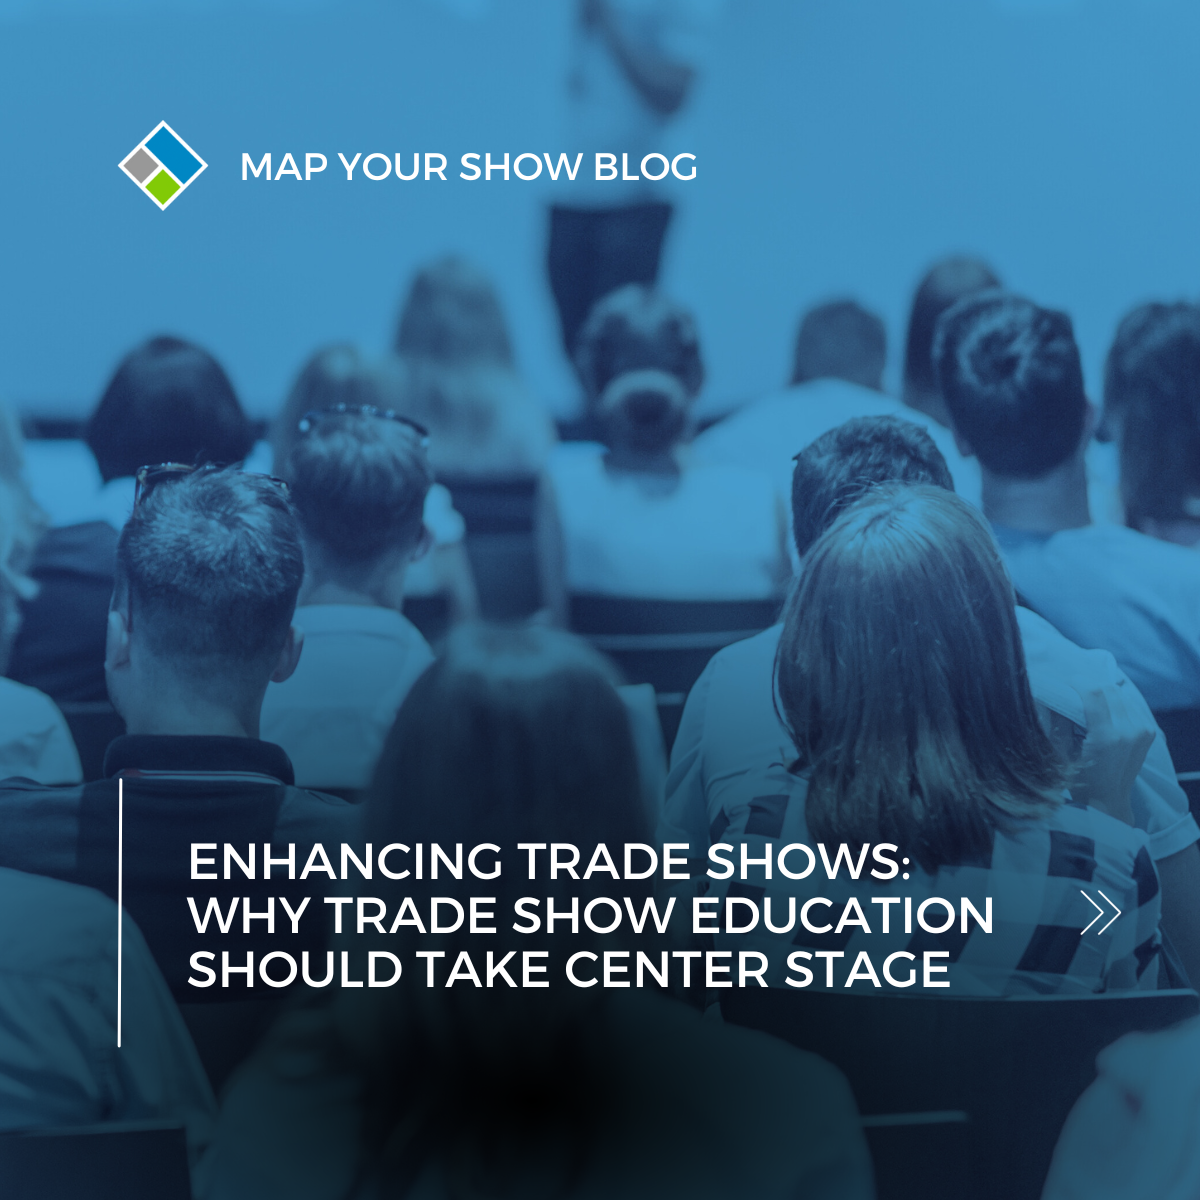 Map Your Show Blog by Ben Dunlap. Enhancing Trade Shows: Why Trade Show Education Should Take Center Stage